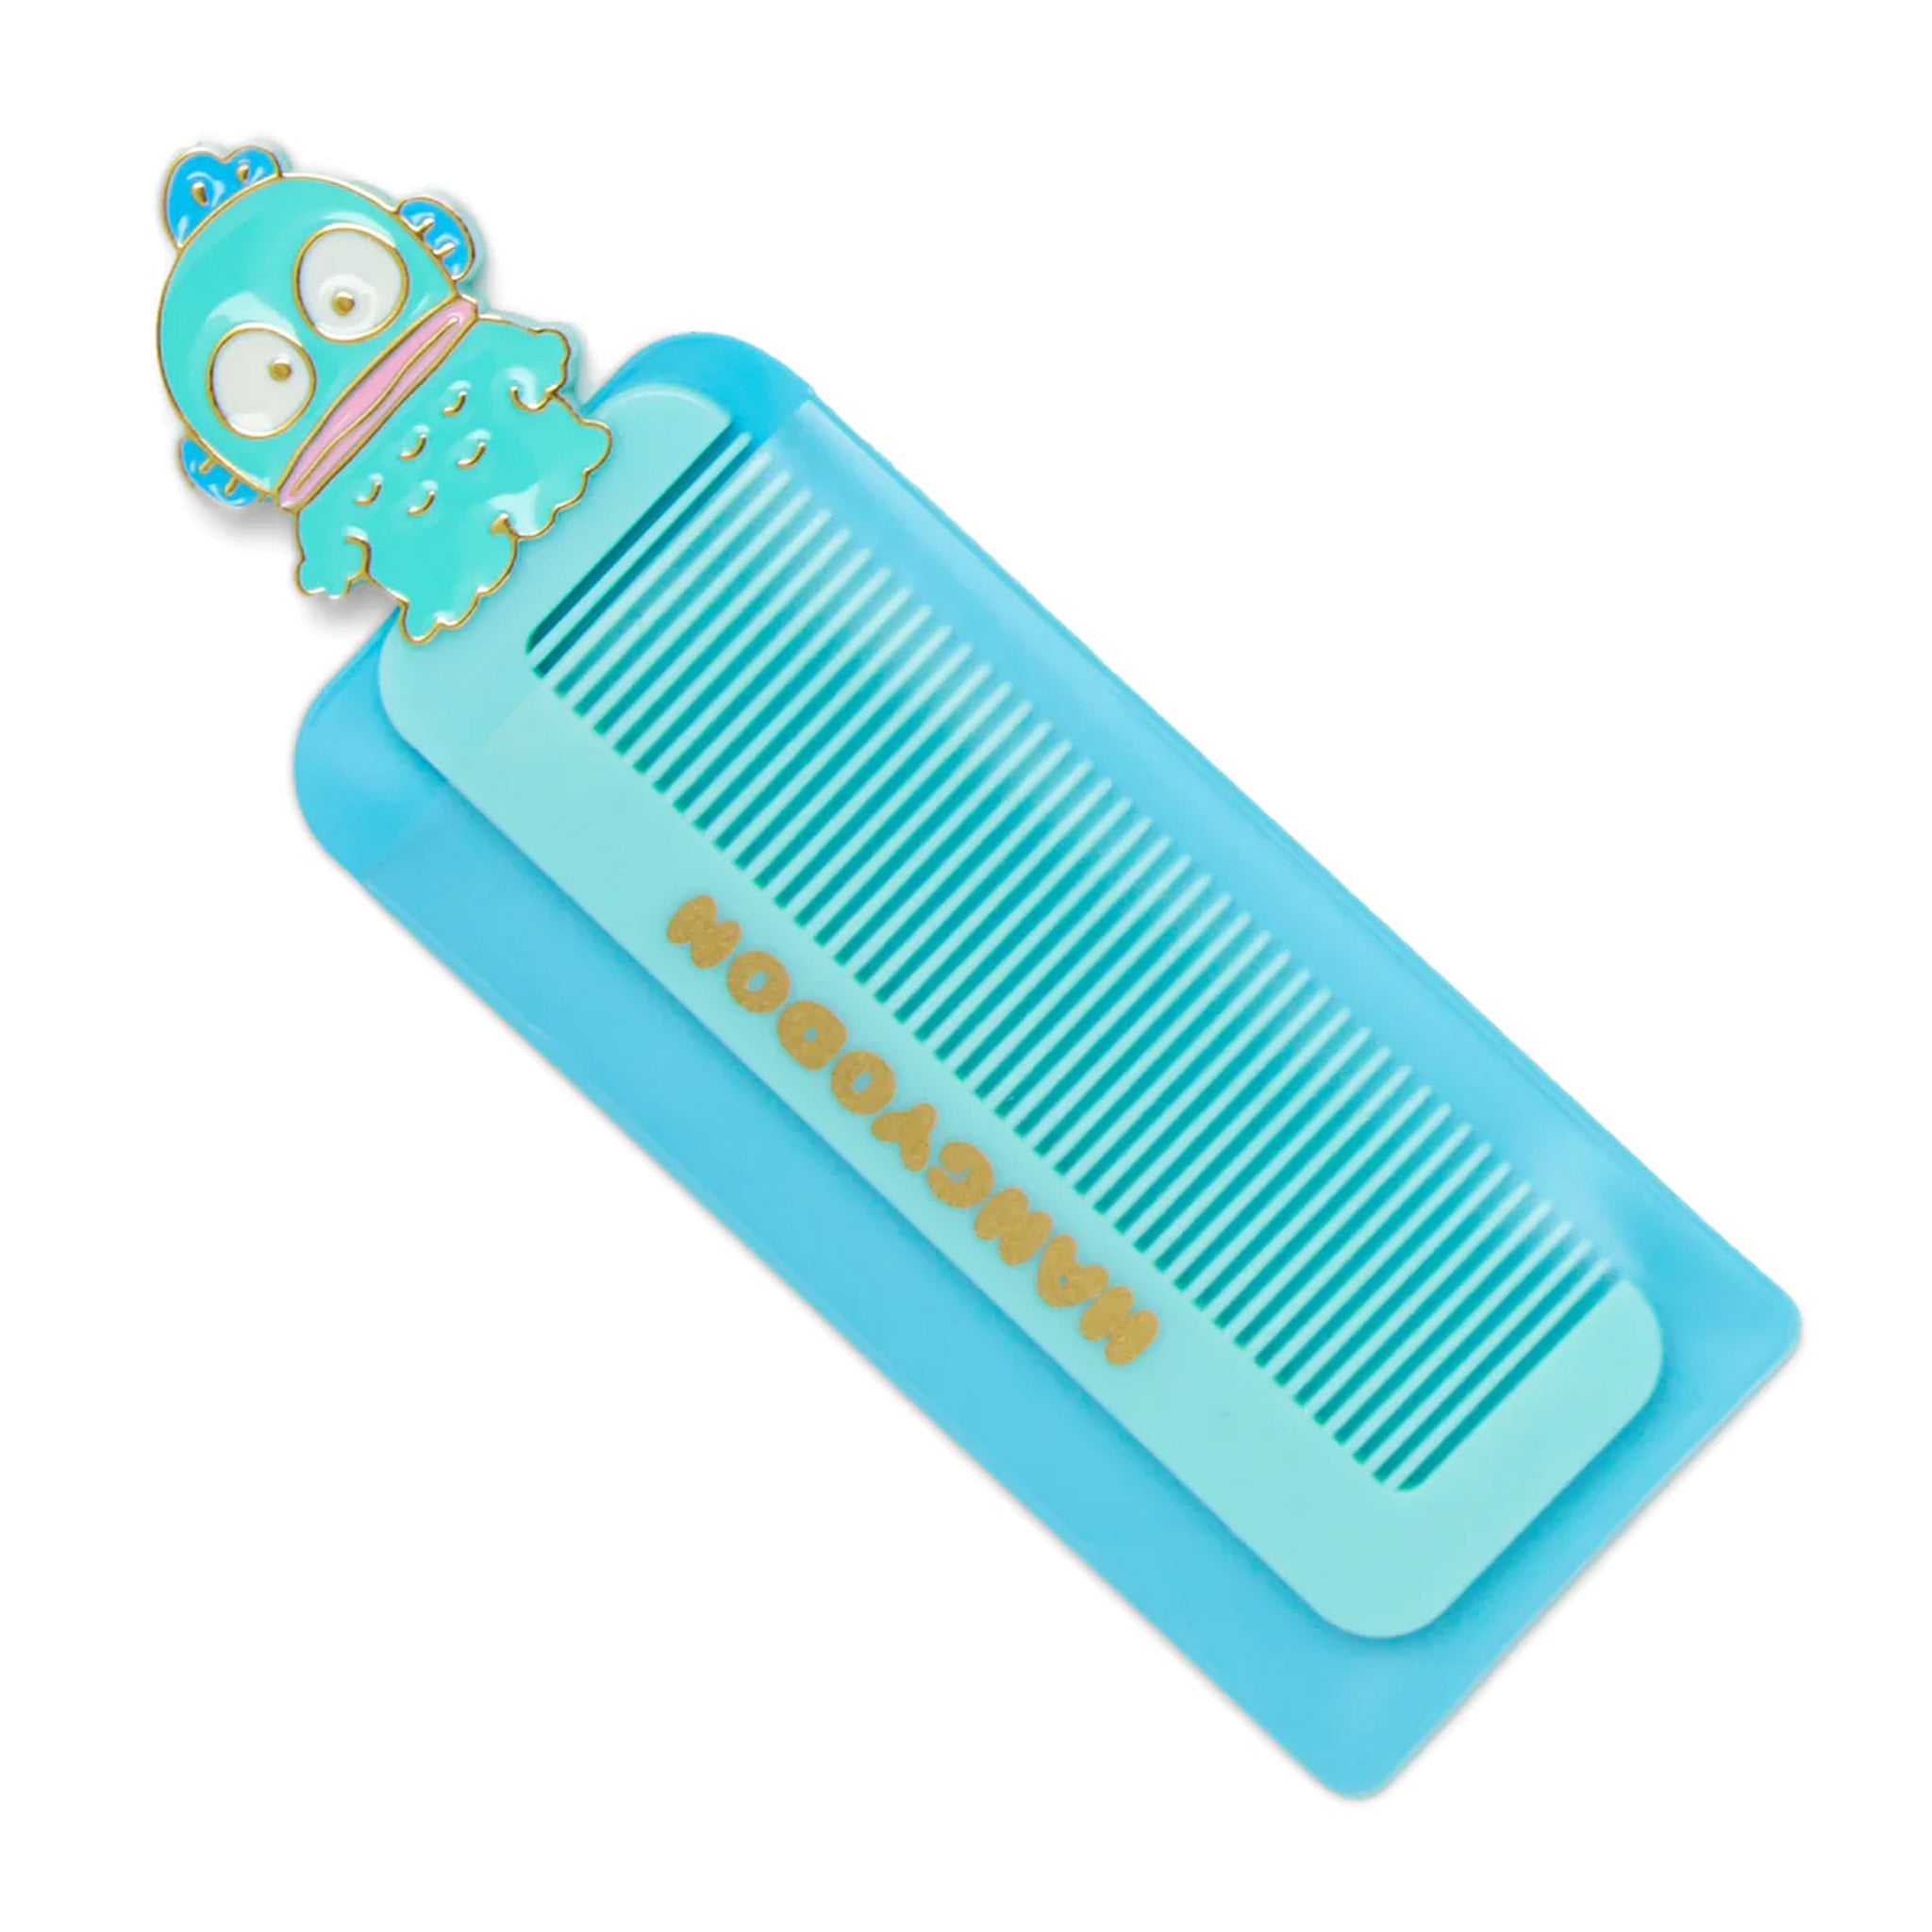 Sanrio Compact Comb with Case